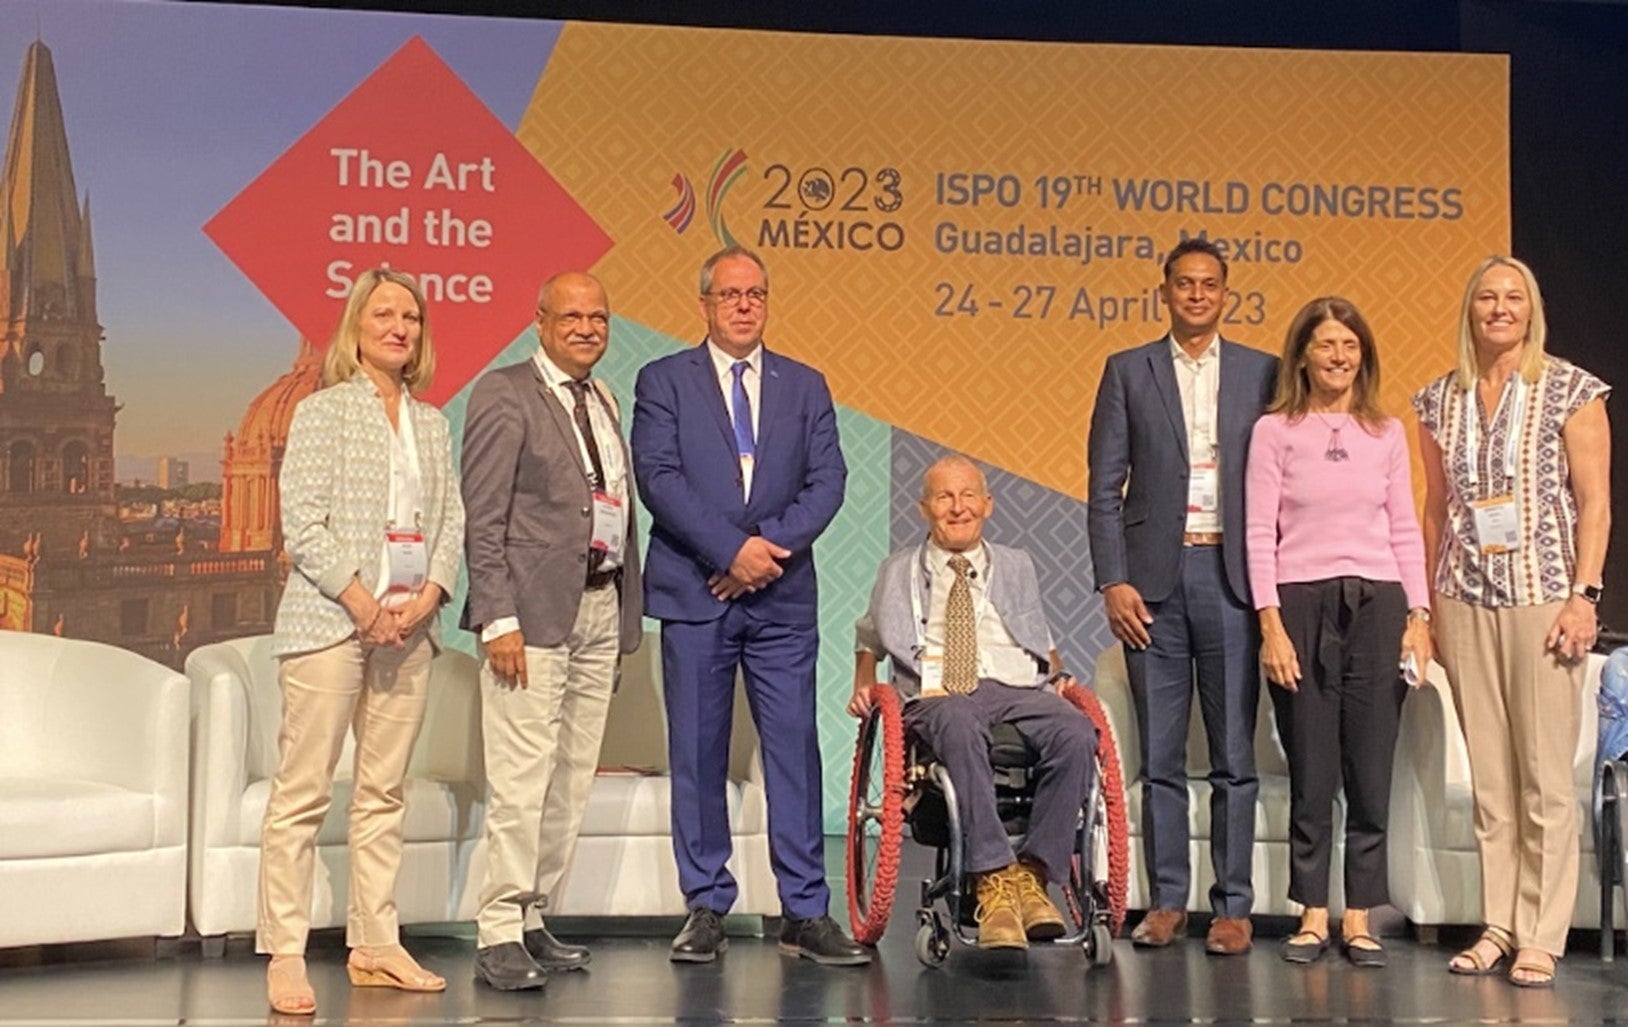 Pictured left to right: Kylie Shae (WHO), Chapal Khasnabis (WHO), Claude Tardif (ISPO), David Constantine (ISPO), Alex Kamadu (ISWP), Silvana Contepomi (AATA) and Mariette Deist (ISPO)